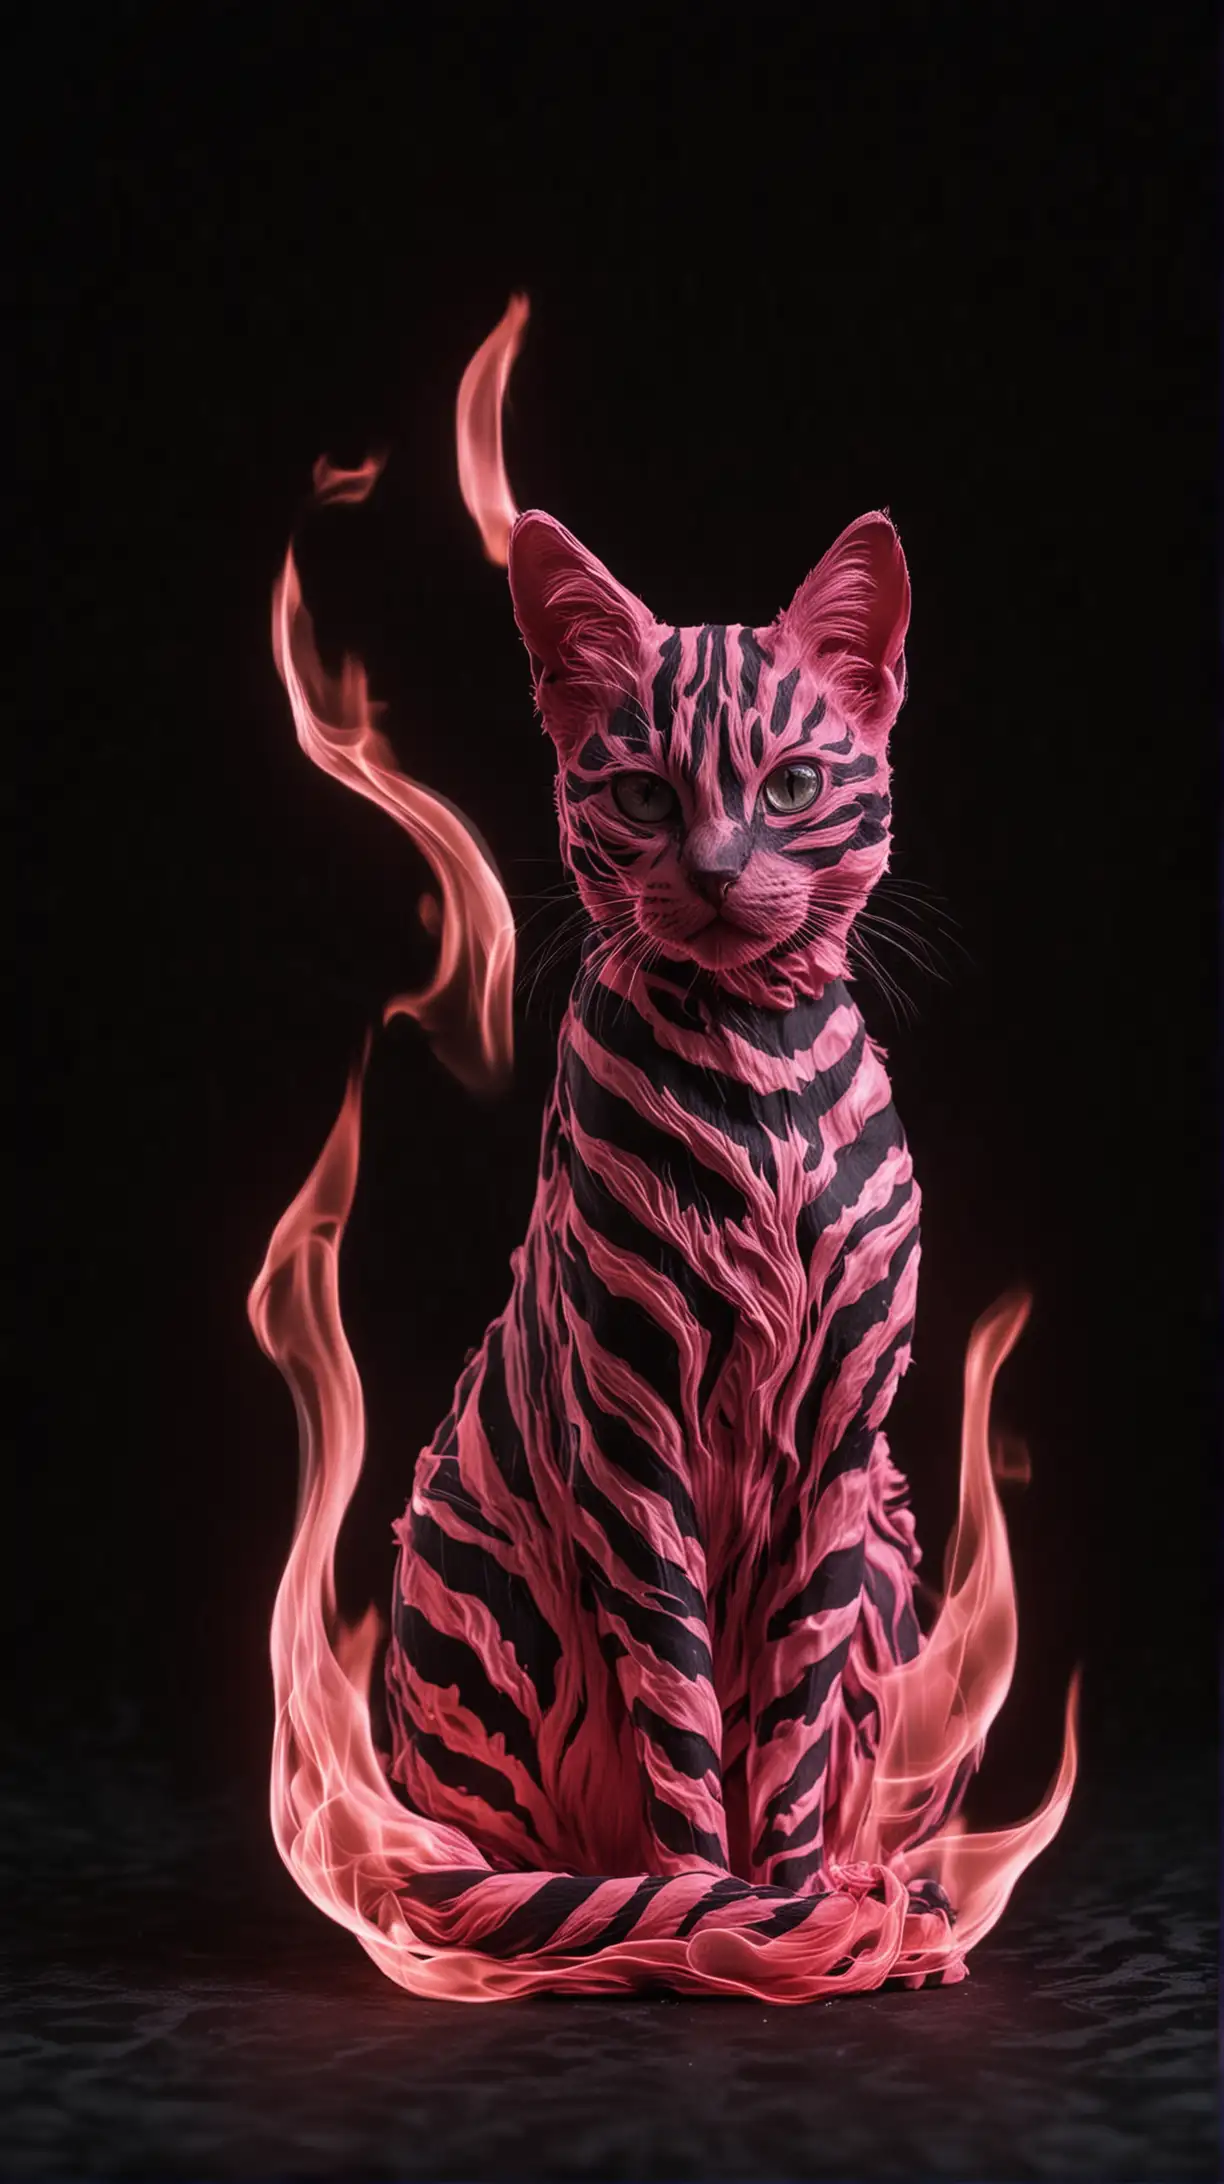 Pink flame in the shape of a cat. Black striped background. very cool. looks far away.